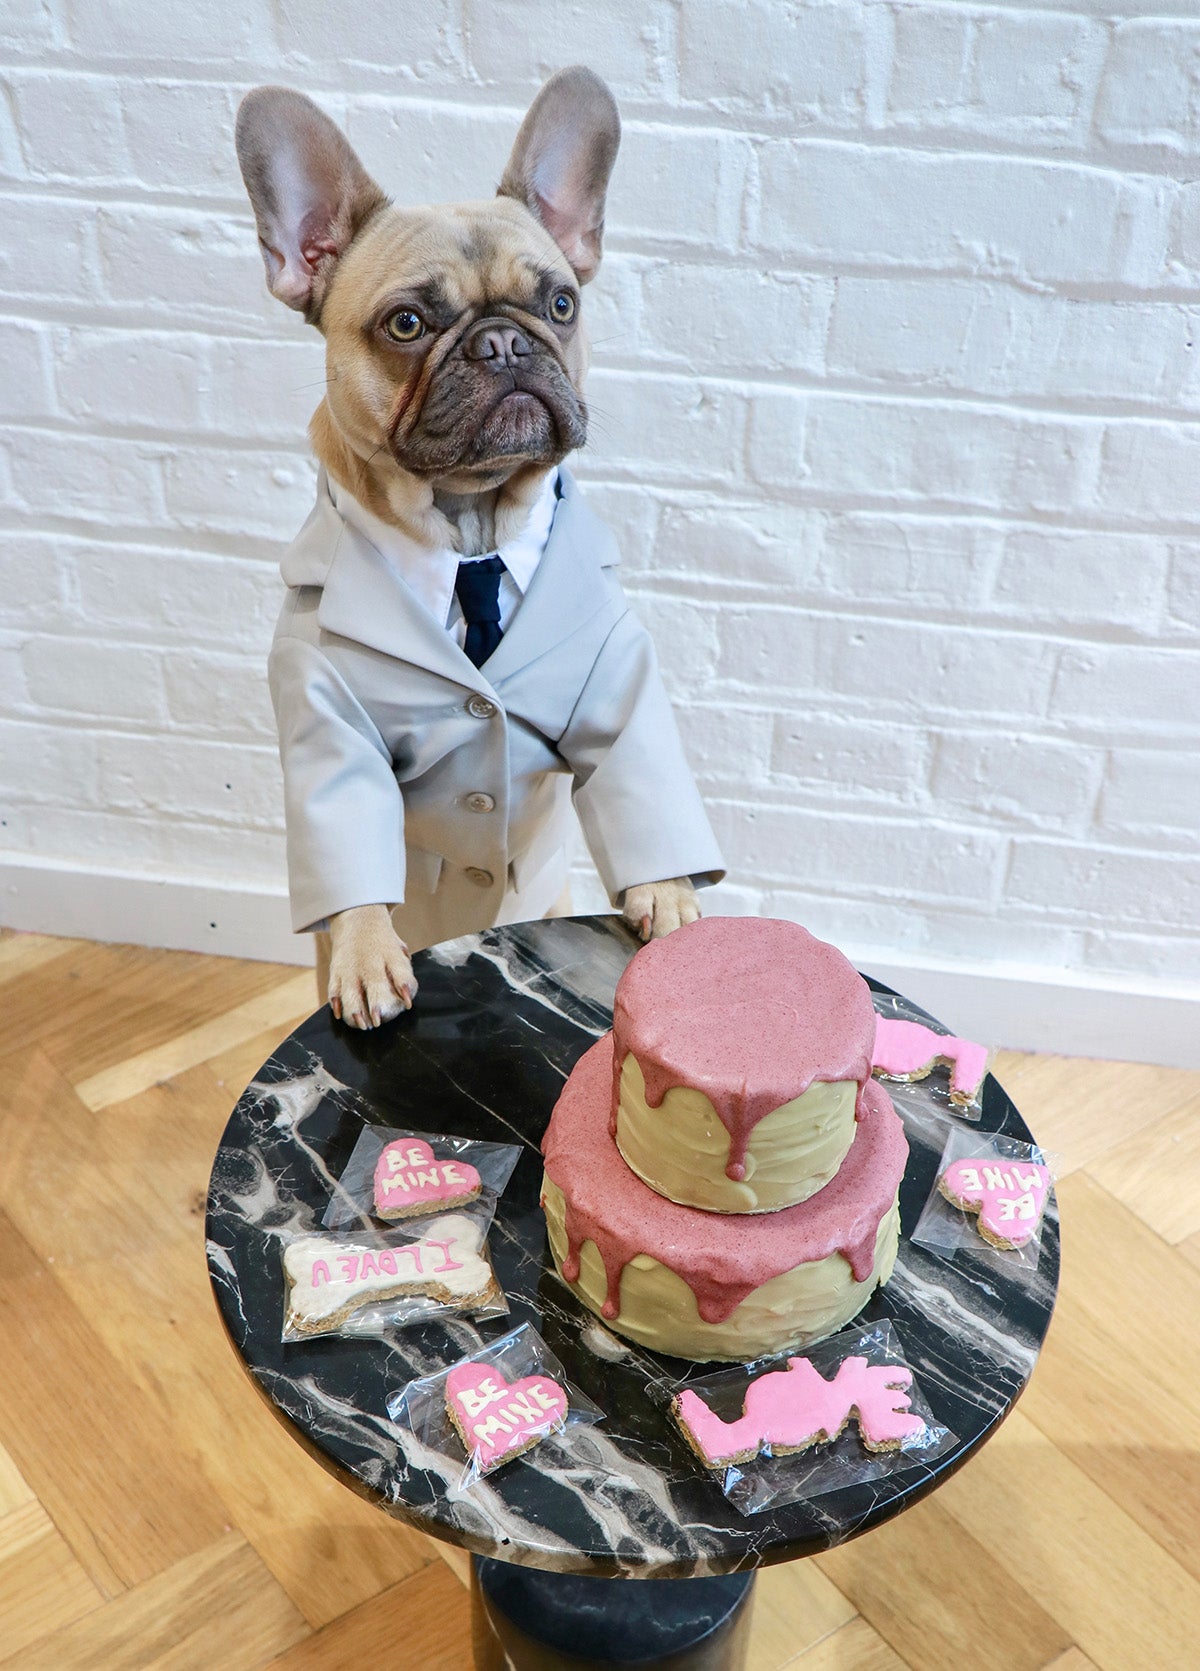 Dog wearing Over Glam Suit in front of a birthday cake